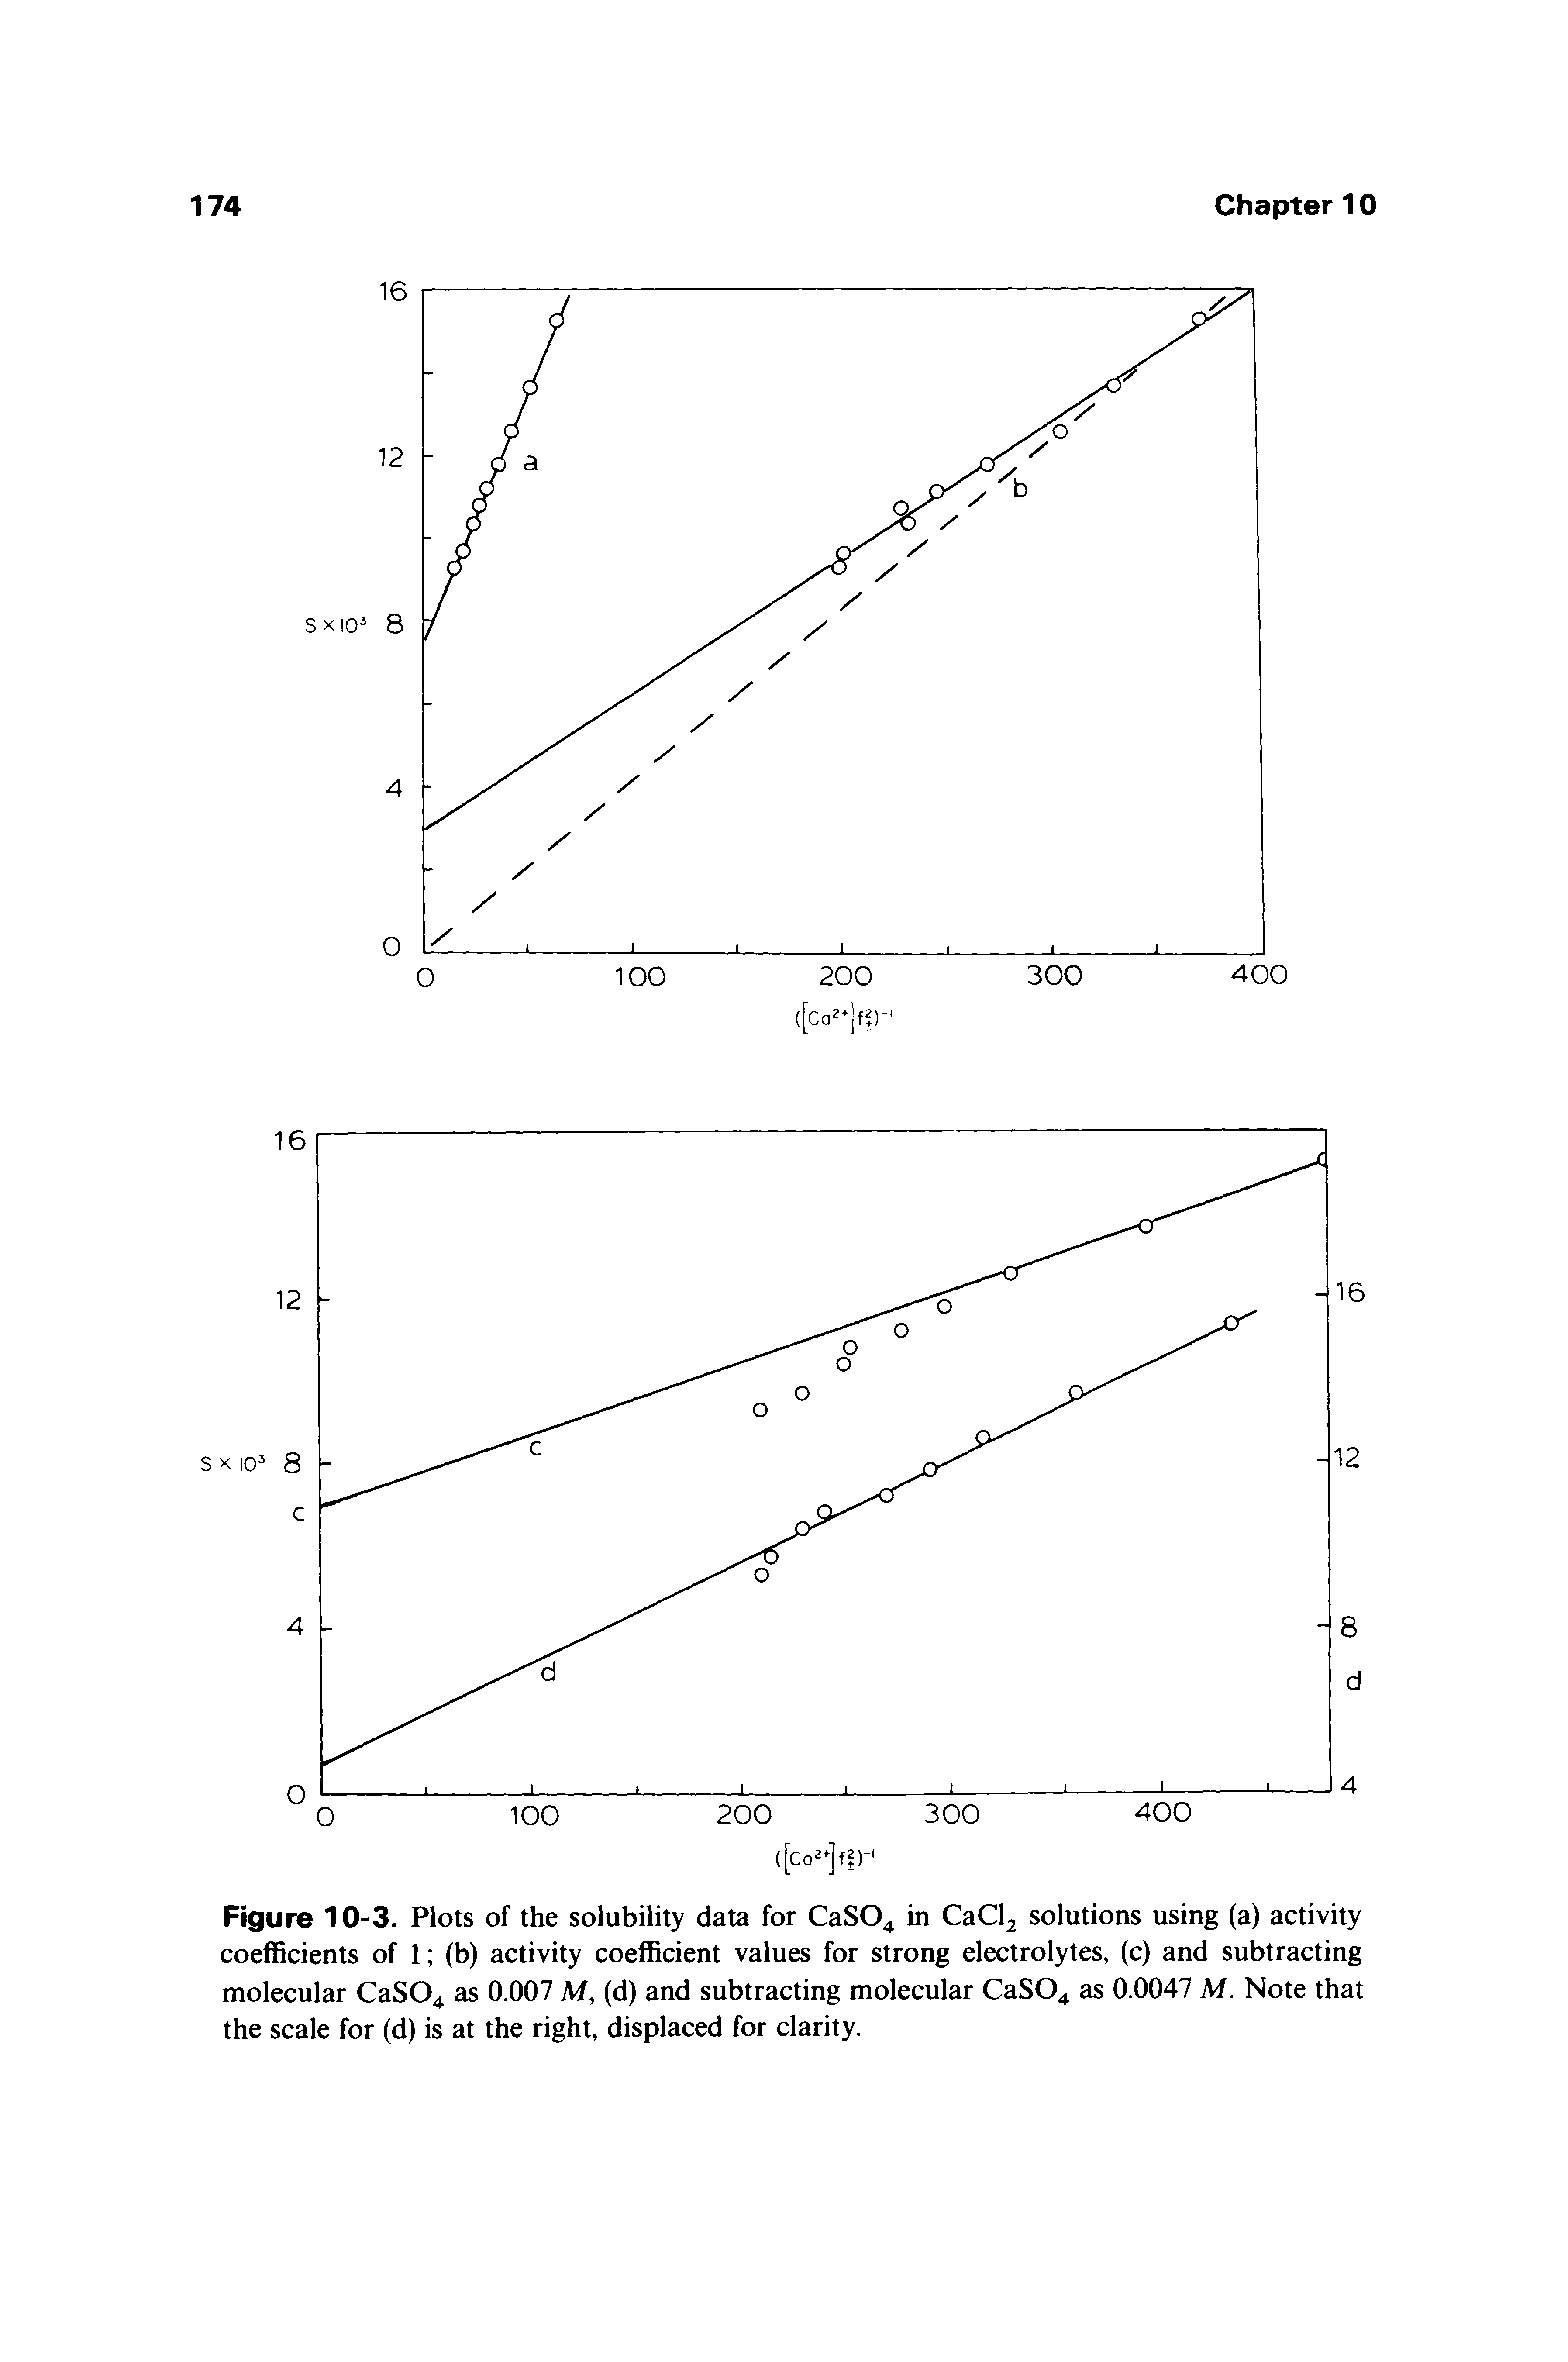 Figure 10-3. Plots of the solubility data for CaS04 in CaCl2 solutions using (a) activity coefficients of 1 (b) activity coefficient values for strong electrolytes, (c) and subtracting molecular CaS04 as 0.007 M, (d) and subtracting molecular CaS04 as 0.0047 M. Note that the scale for (d) is at the right, displaced for clarity.